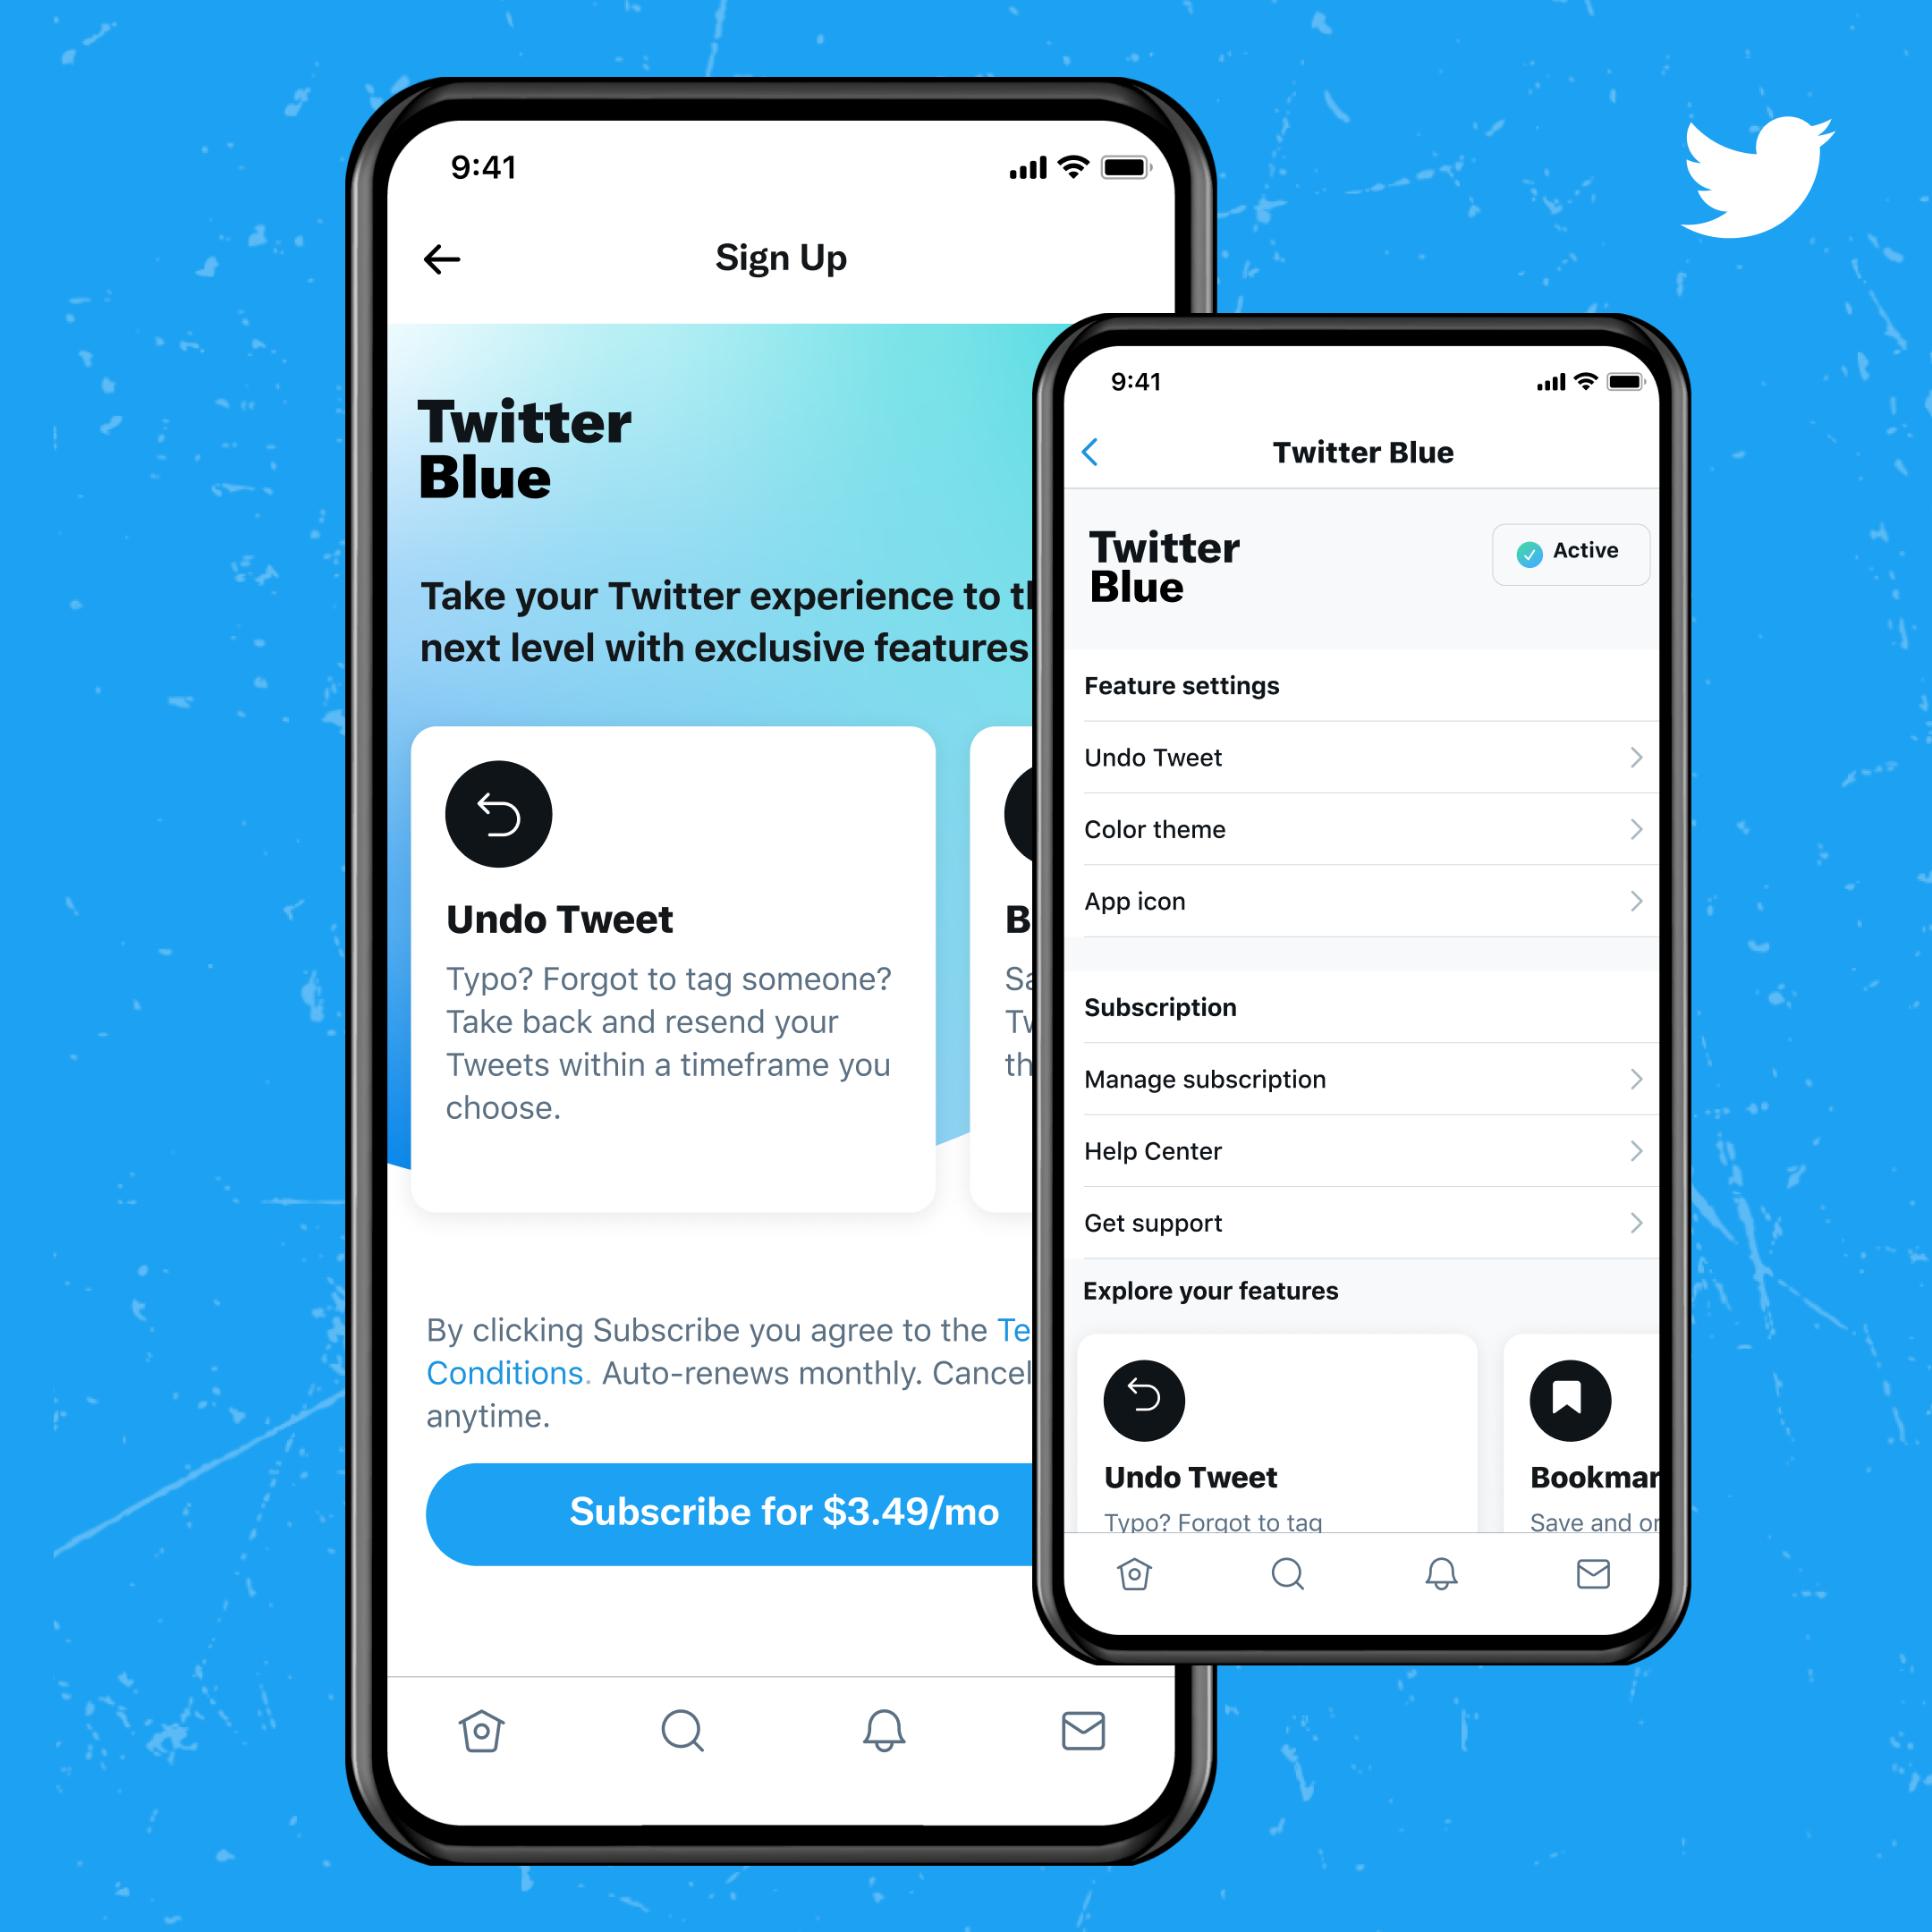 Introducing Twitter Blue - Twitter's first-ever subscription offering